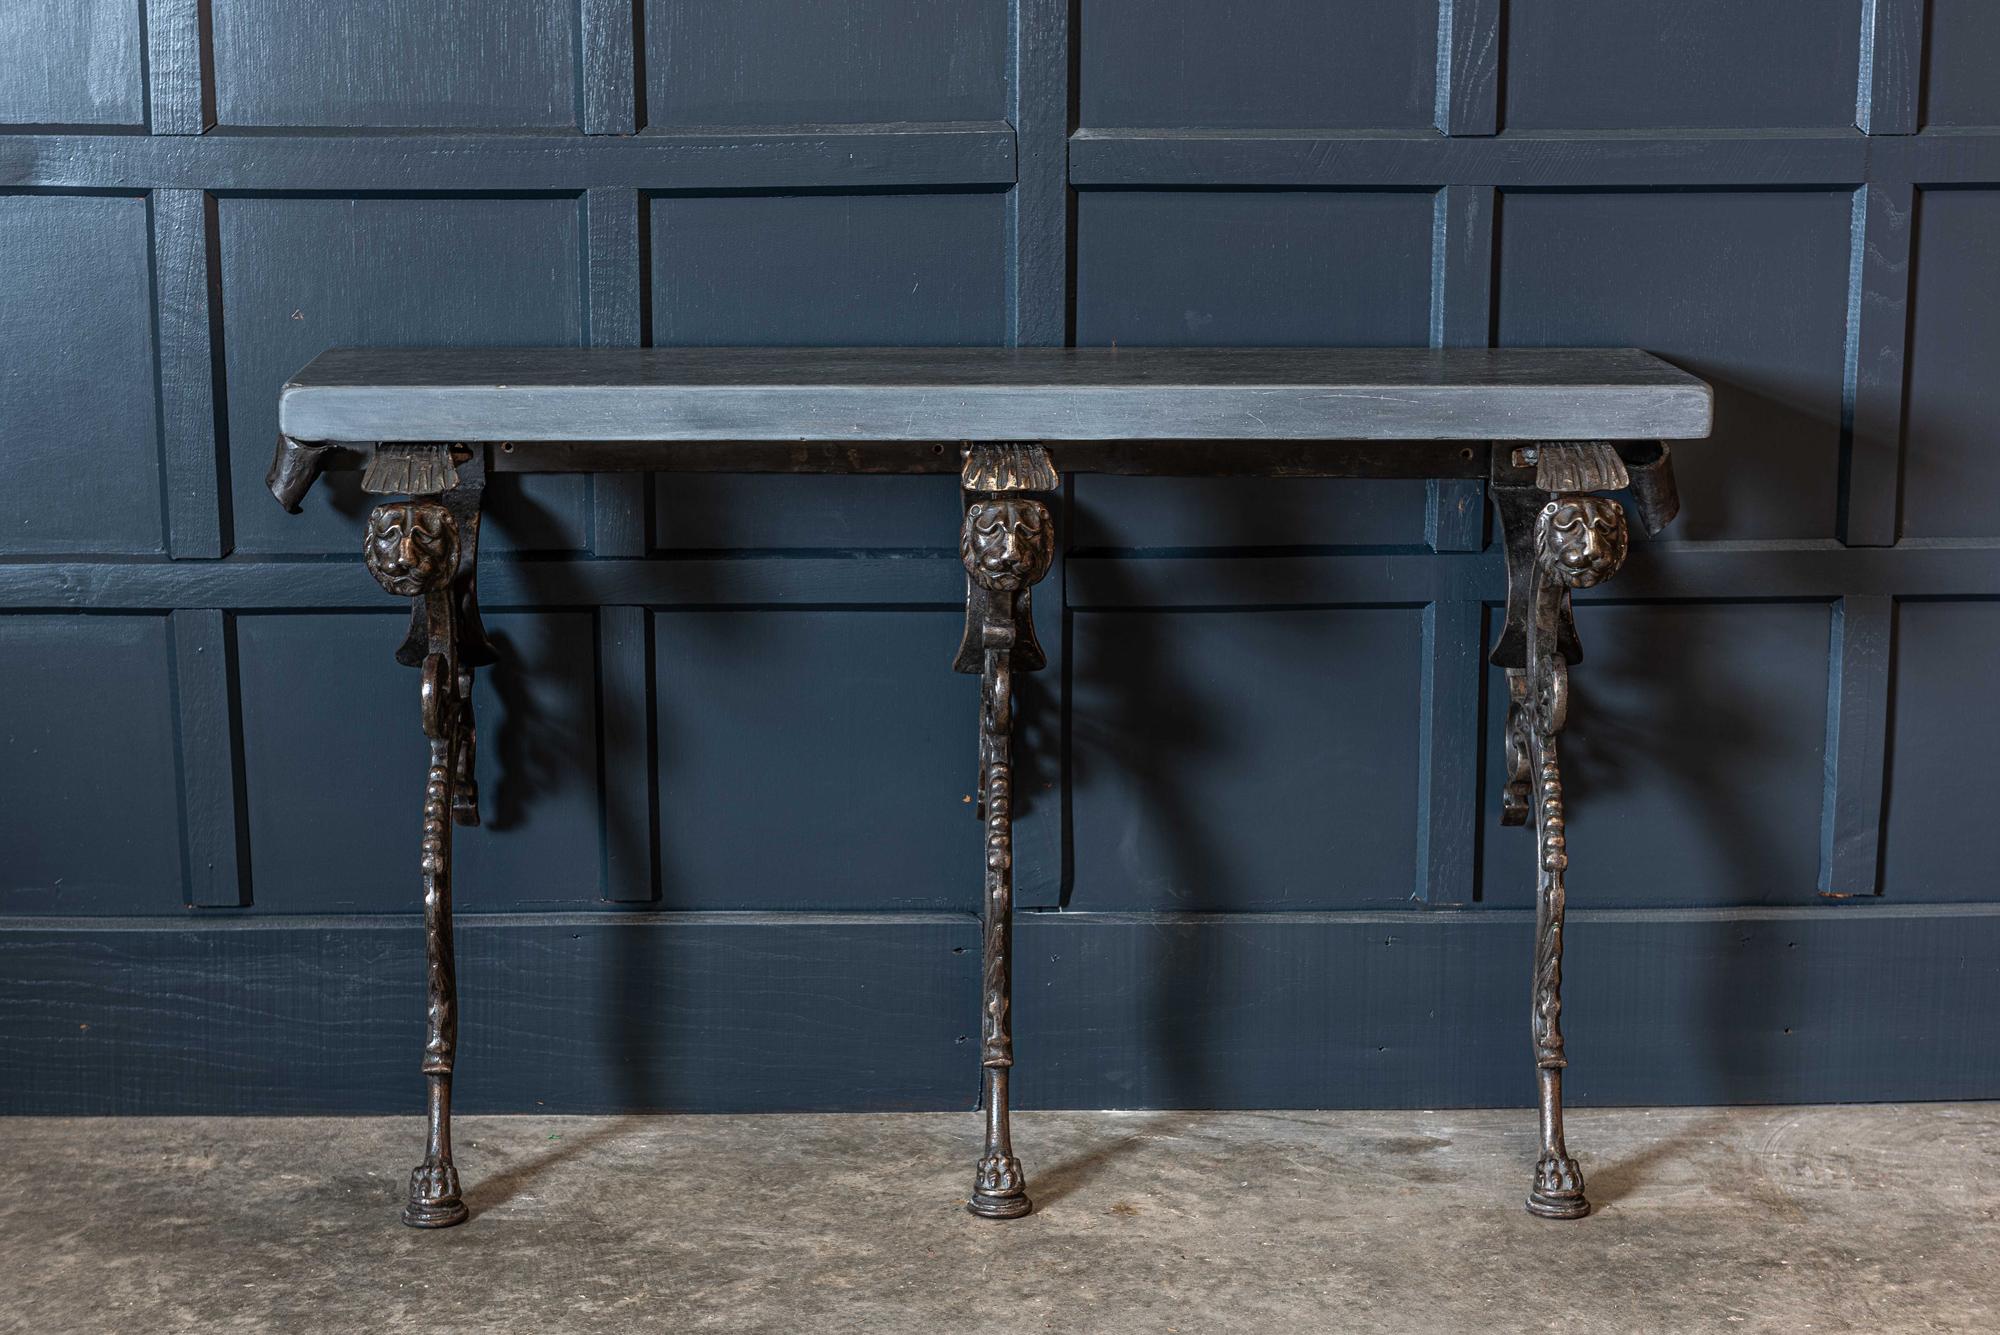 19th century English Coalbrookdale cast iron lion console table,
circa 1880.

A 5cm thick sanded and clear waxed Welsh blue slate top supported on three elaborate Coalbrookdale cast iron polished supports with lion’s heads, acanthus cast detail